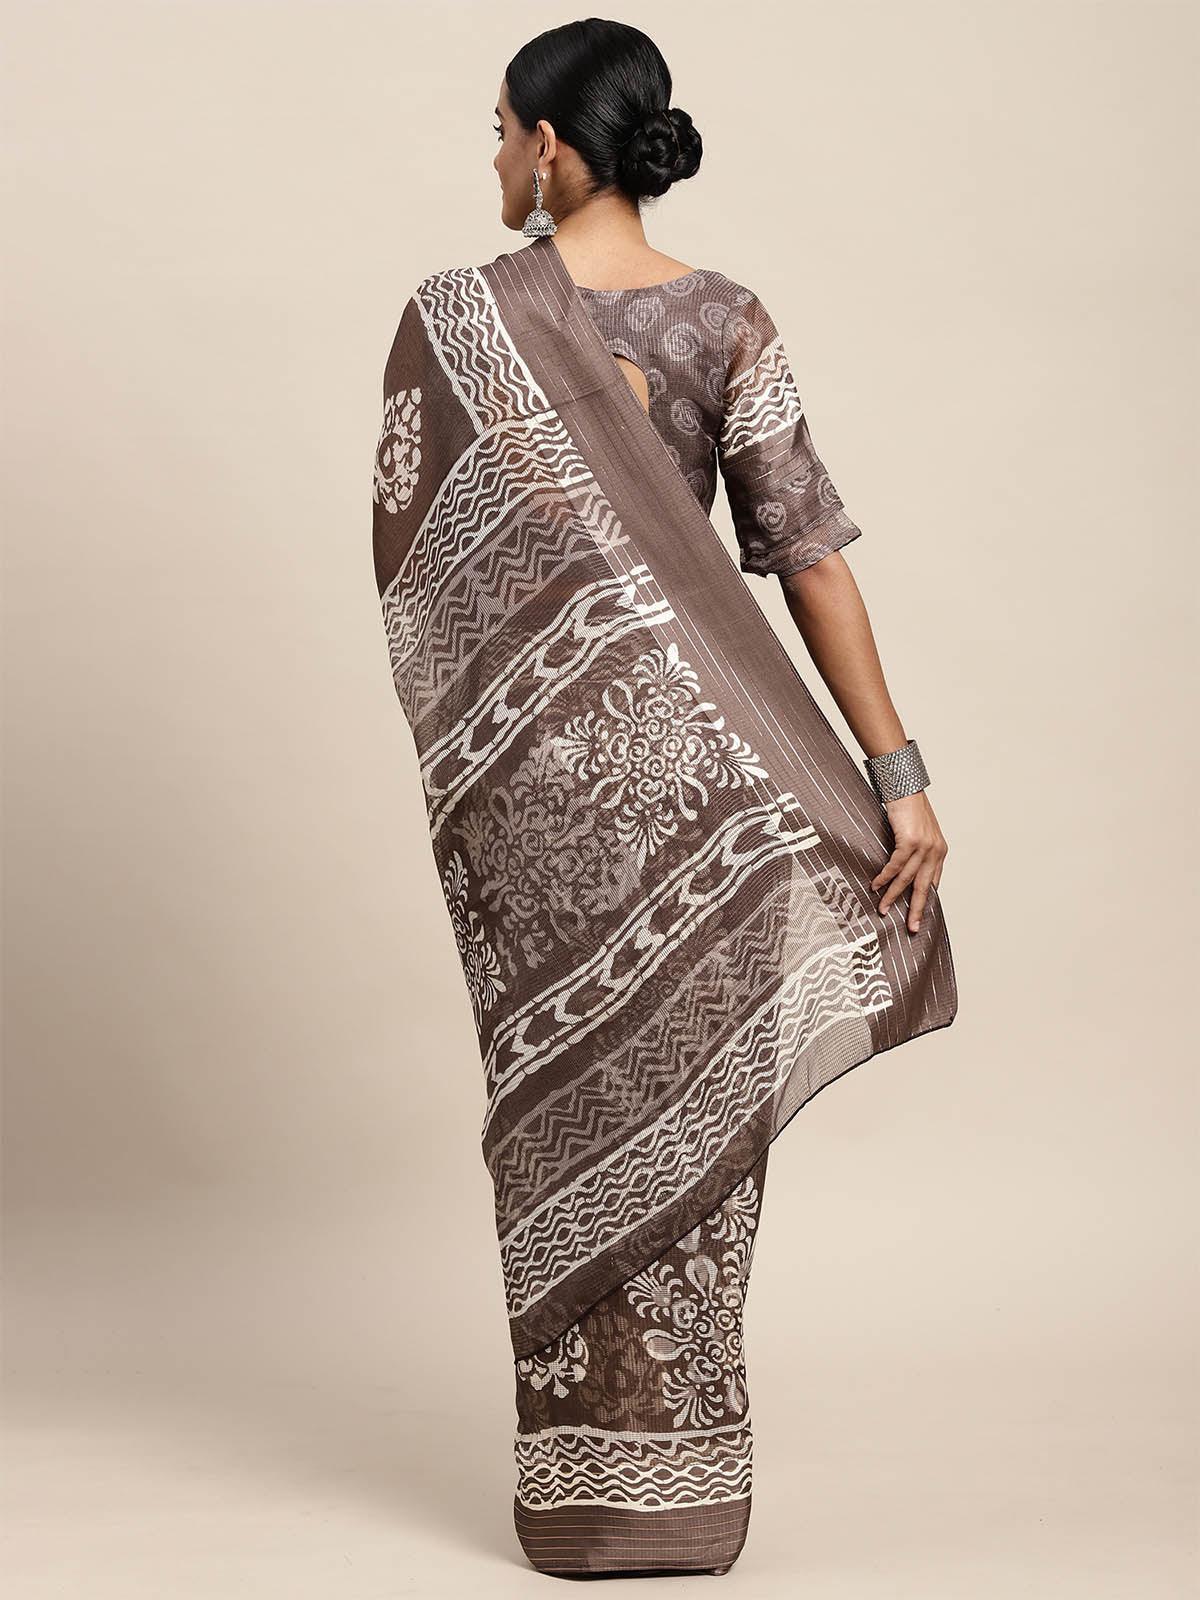 Brasso Charcoal Grey Printed Designer Saree With Blouse Piece - Odette